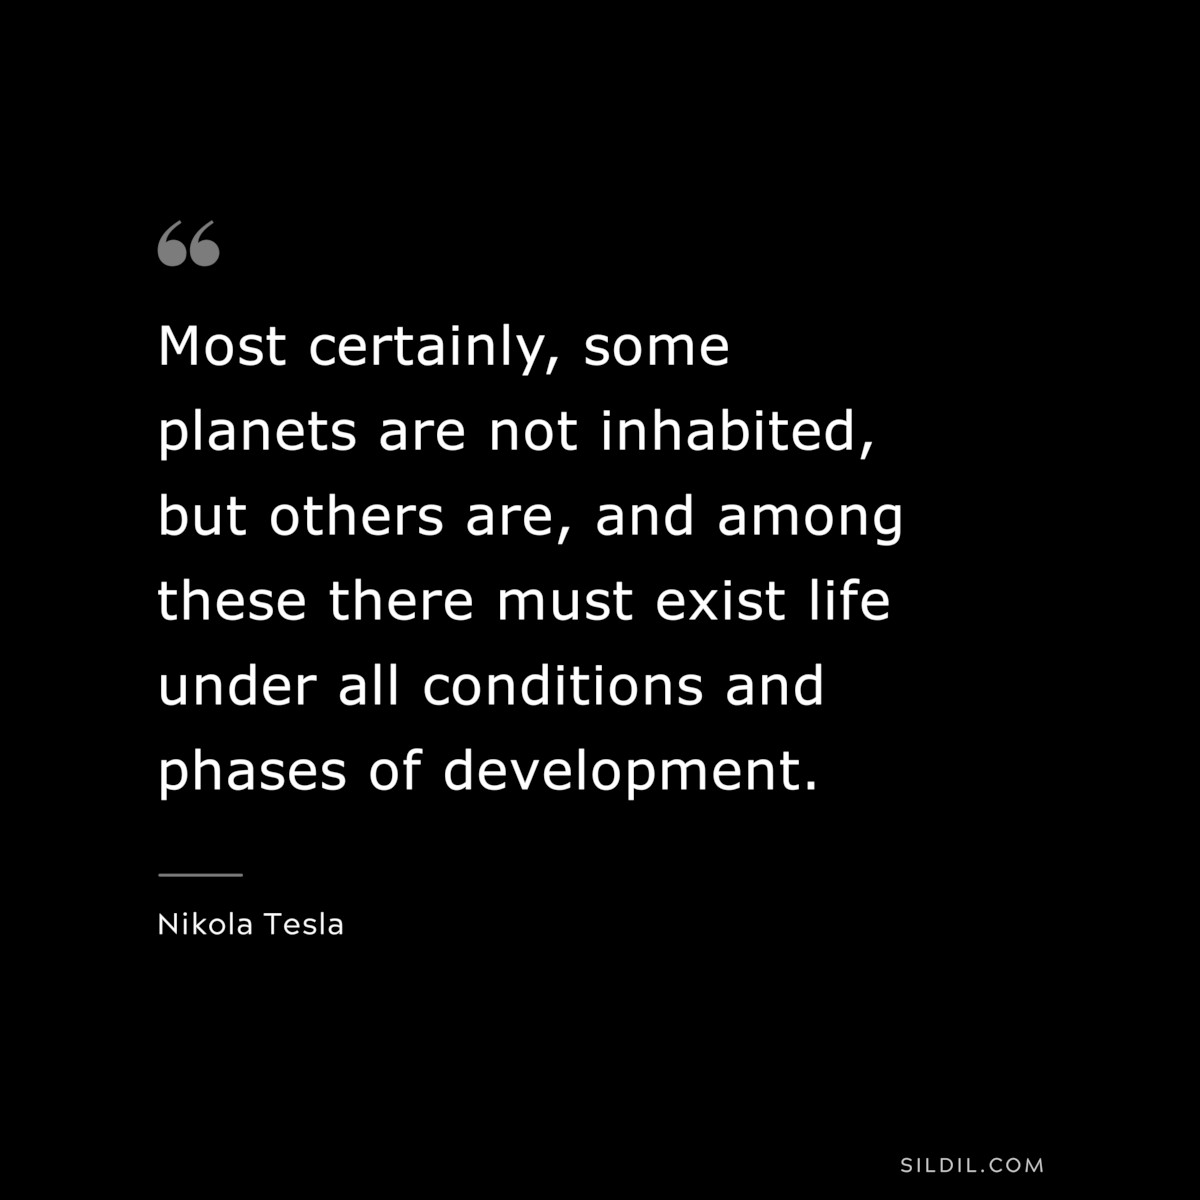 Most certainly, some planets are not inhabited, but others are, and among these there must exist life under all conditions and phases of development. ― Nikola Tesla